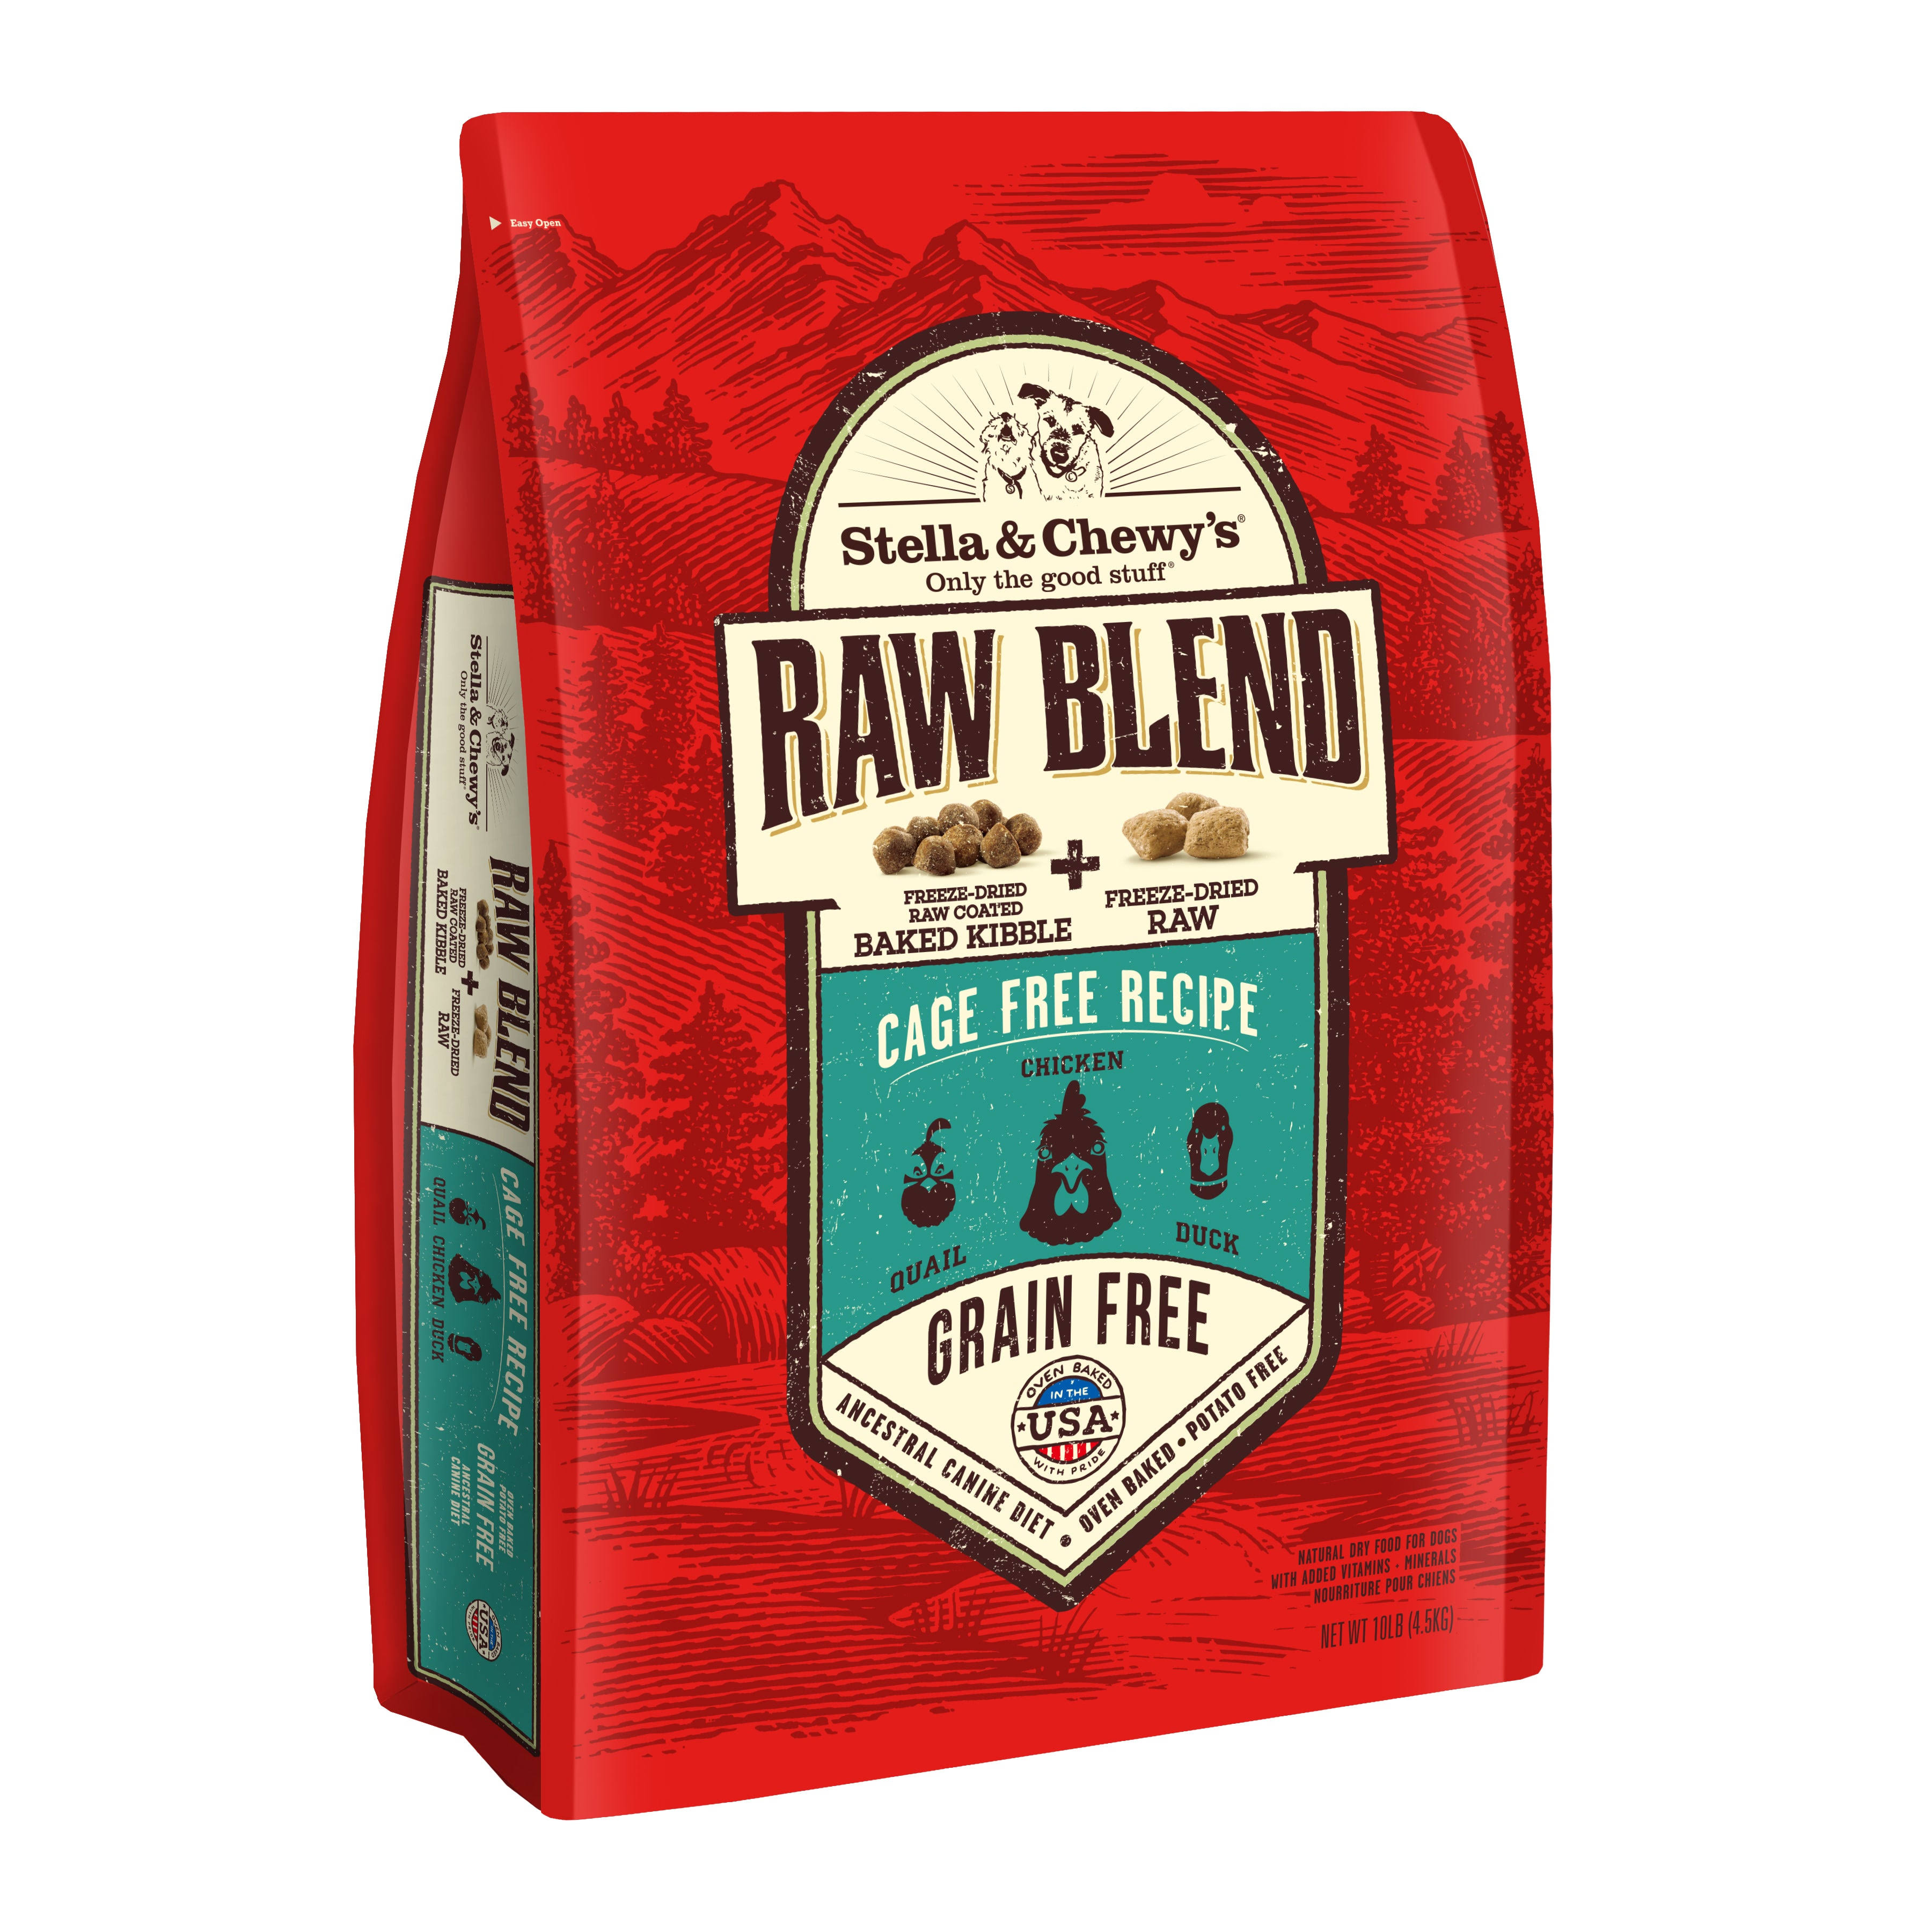 Stella & Chewy's Raw Blend Cage Free Recipe Dog Food 10lb